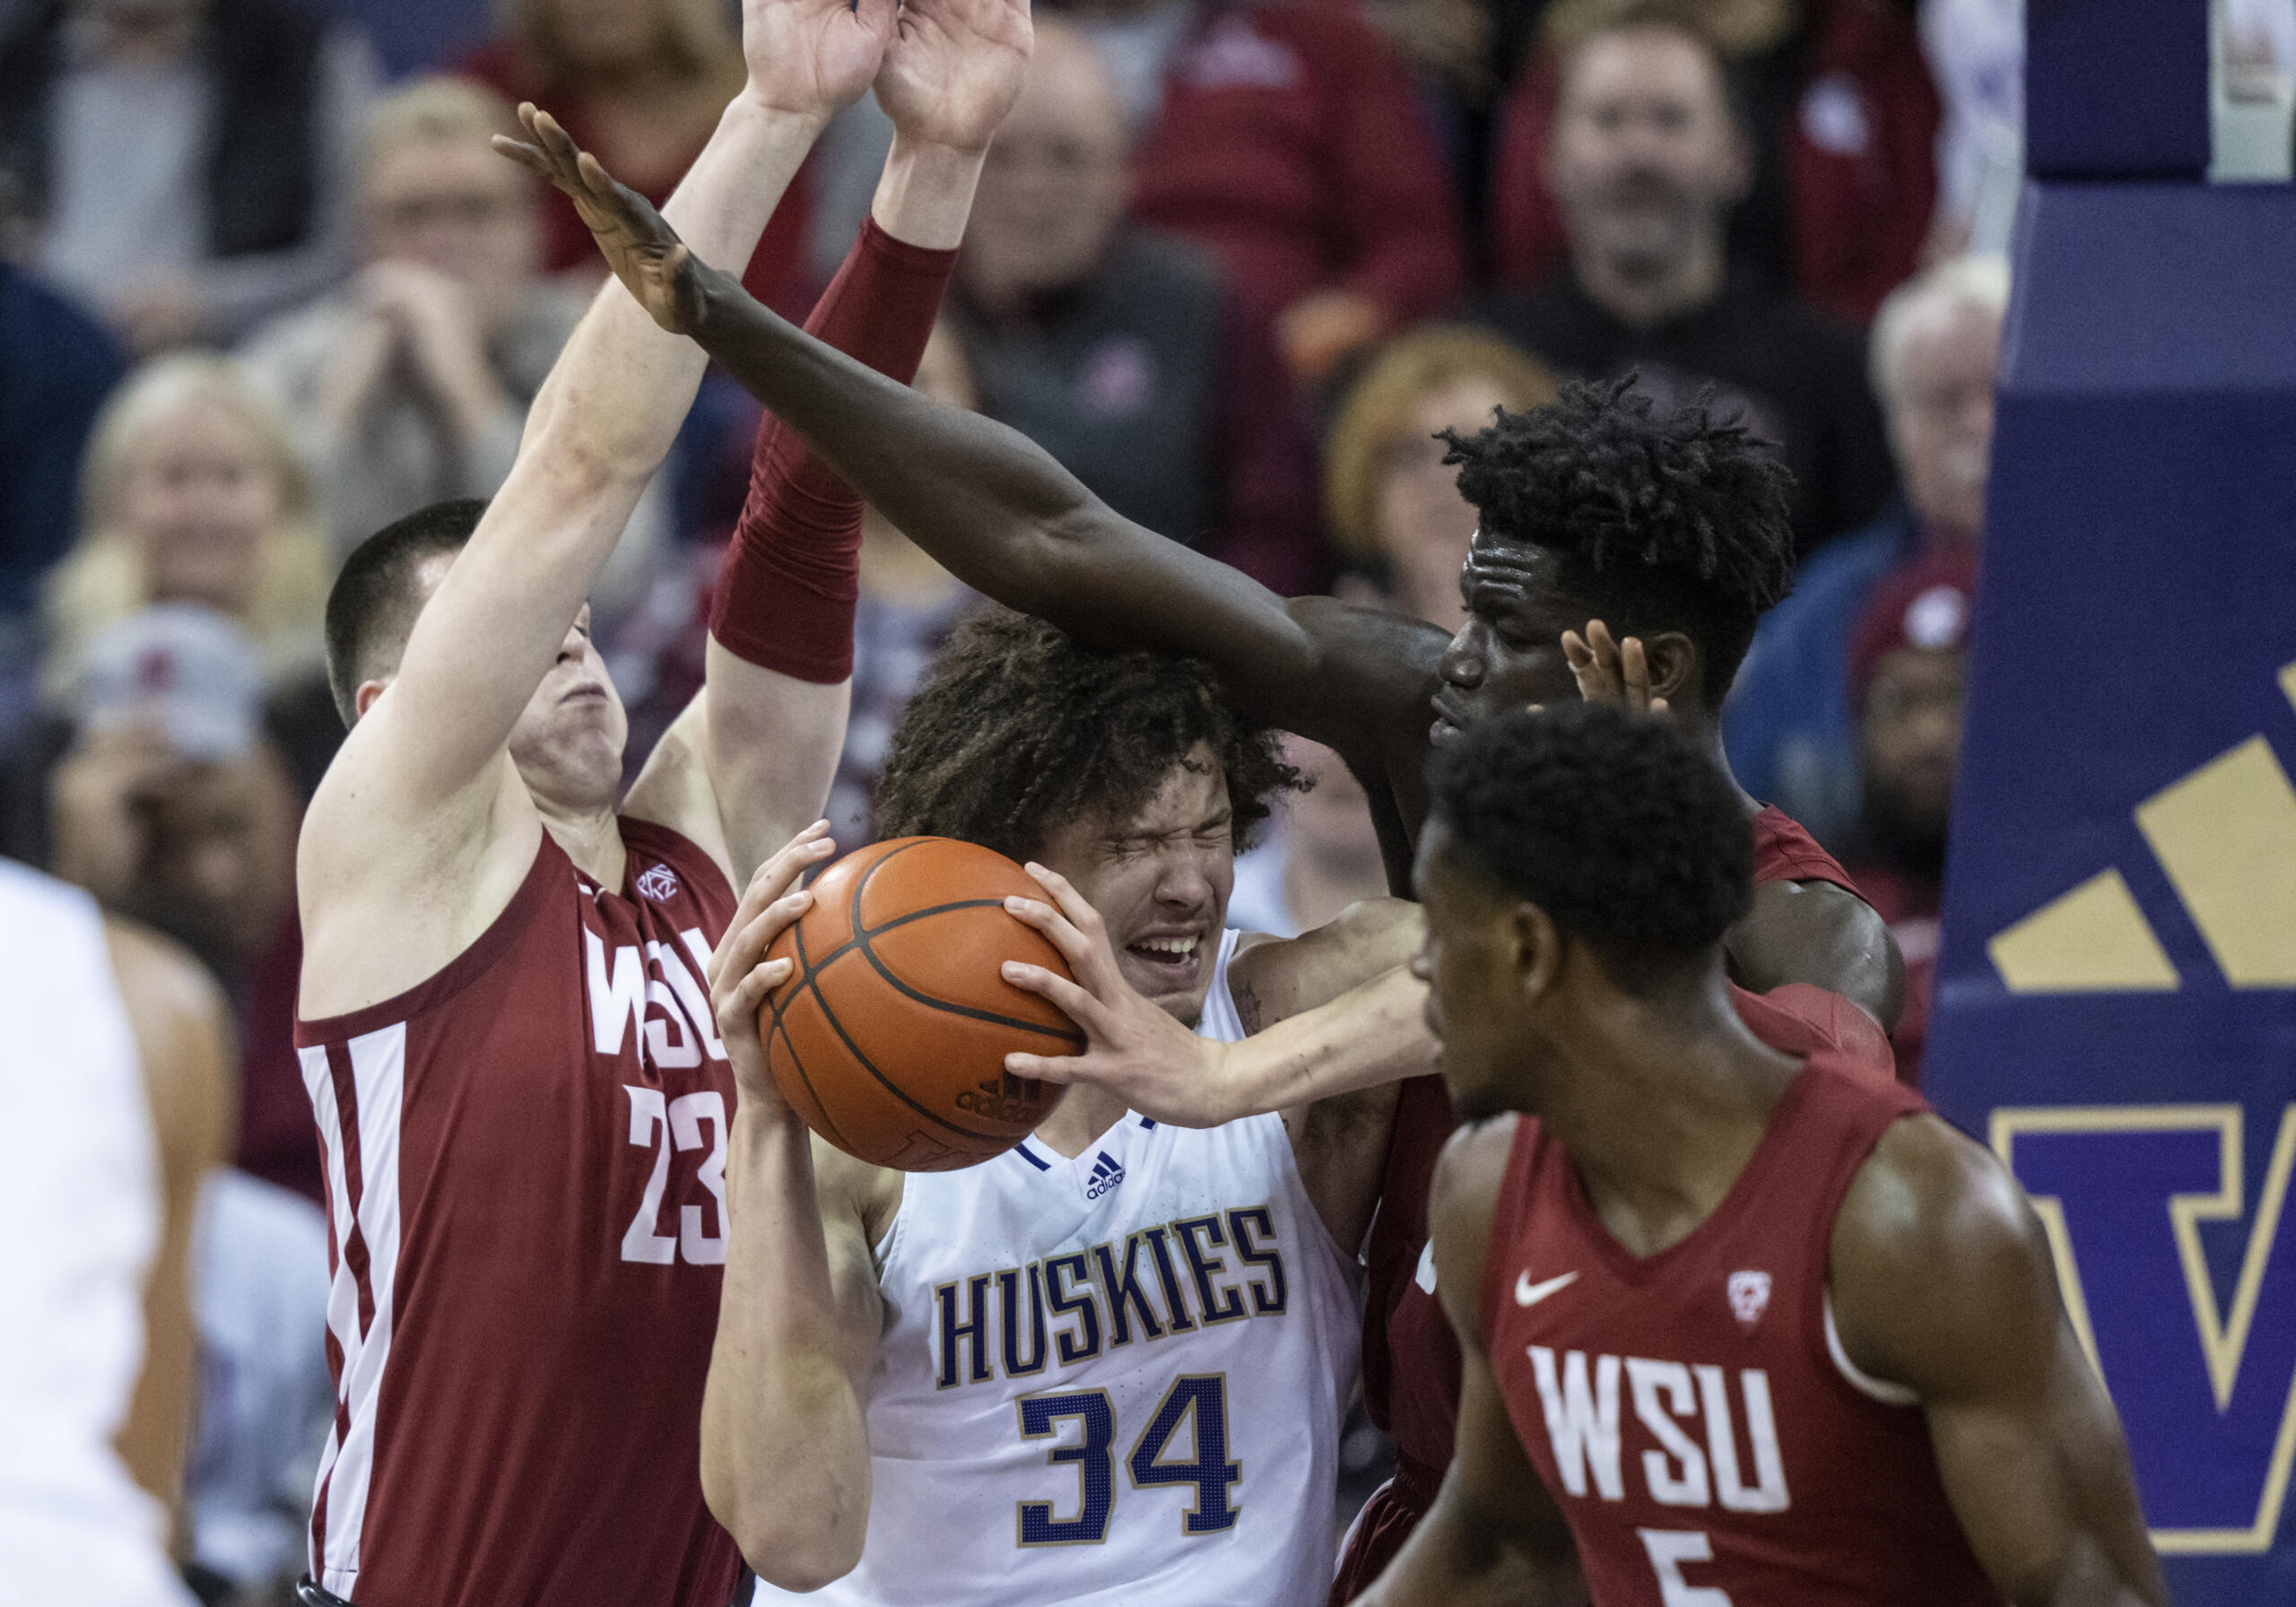 Washington center Braxton Meah, center, attempts to drive against Washington State forward Andrej Jakimovski, left, guard TJ Bamba, right, and forward Mouhamed Gueye during the second half of an NCAA college basketball game Thursday, March 2, 2023, in Seattle.